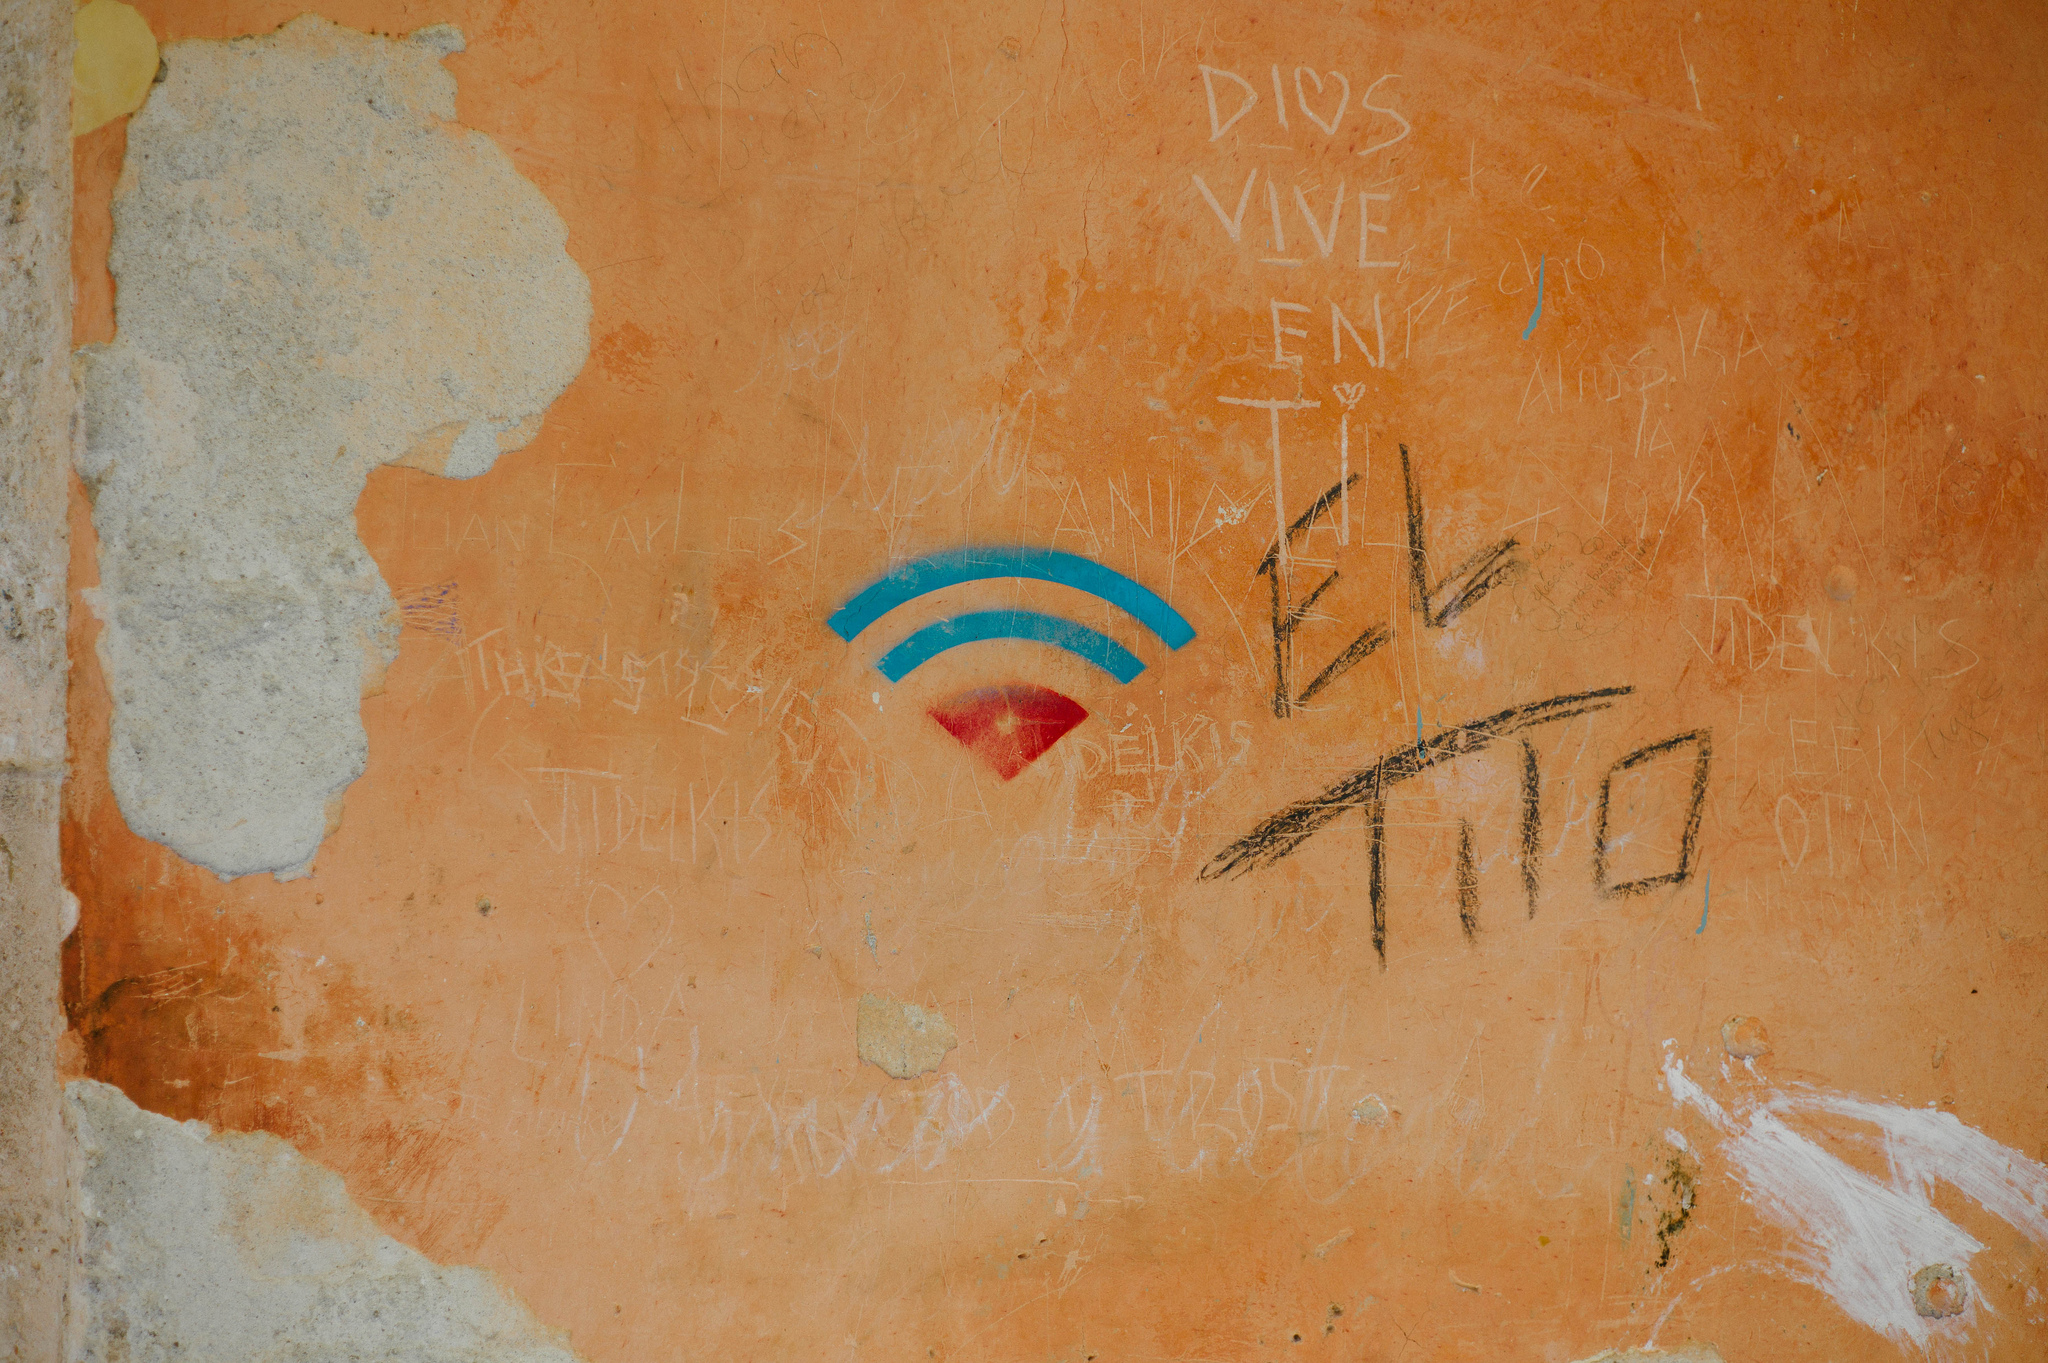 A WiFi symbol in Old Havana, Cuba. Photo by Nano Anderson, taken from Flickr under a CC License BY 2.0.